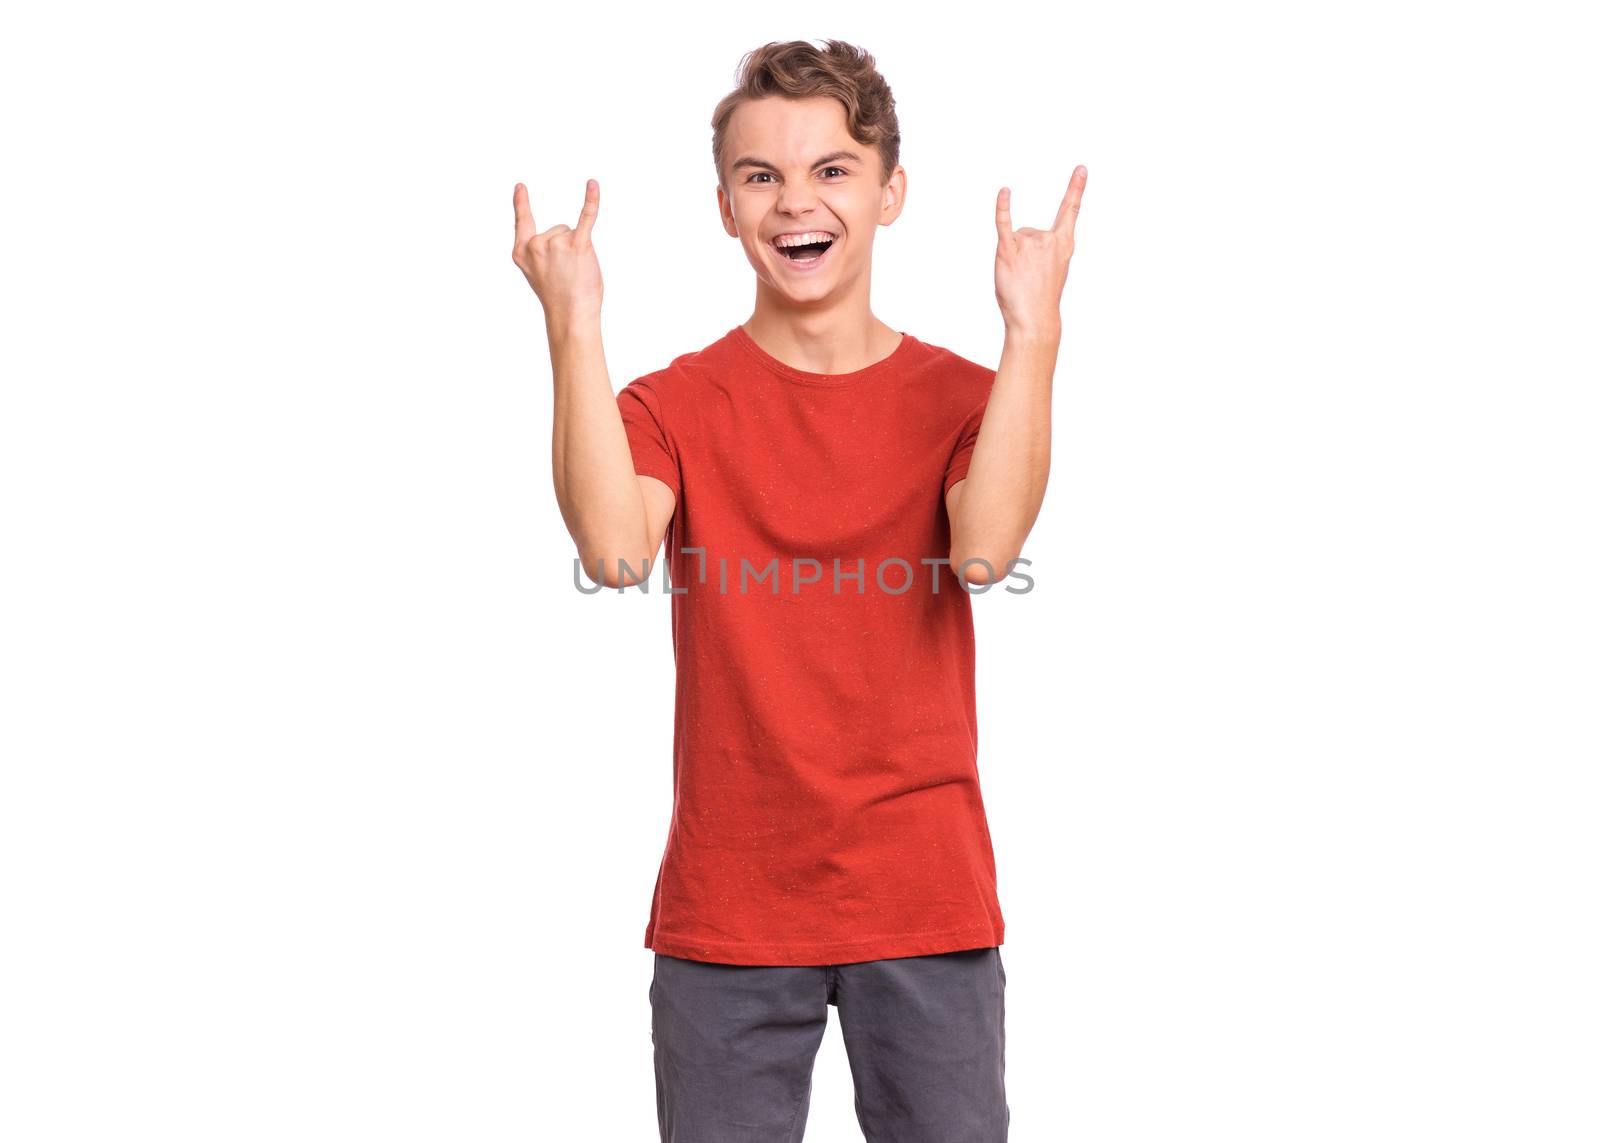 Handsome teen boy laughing looking very happy, isolated on white background.